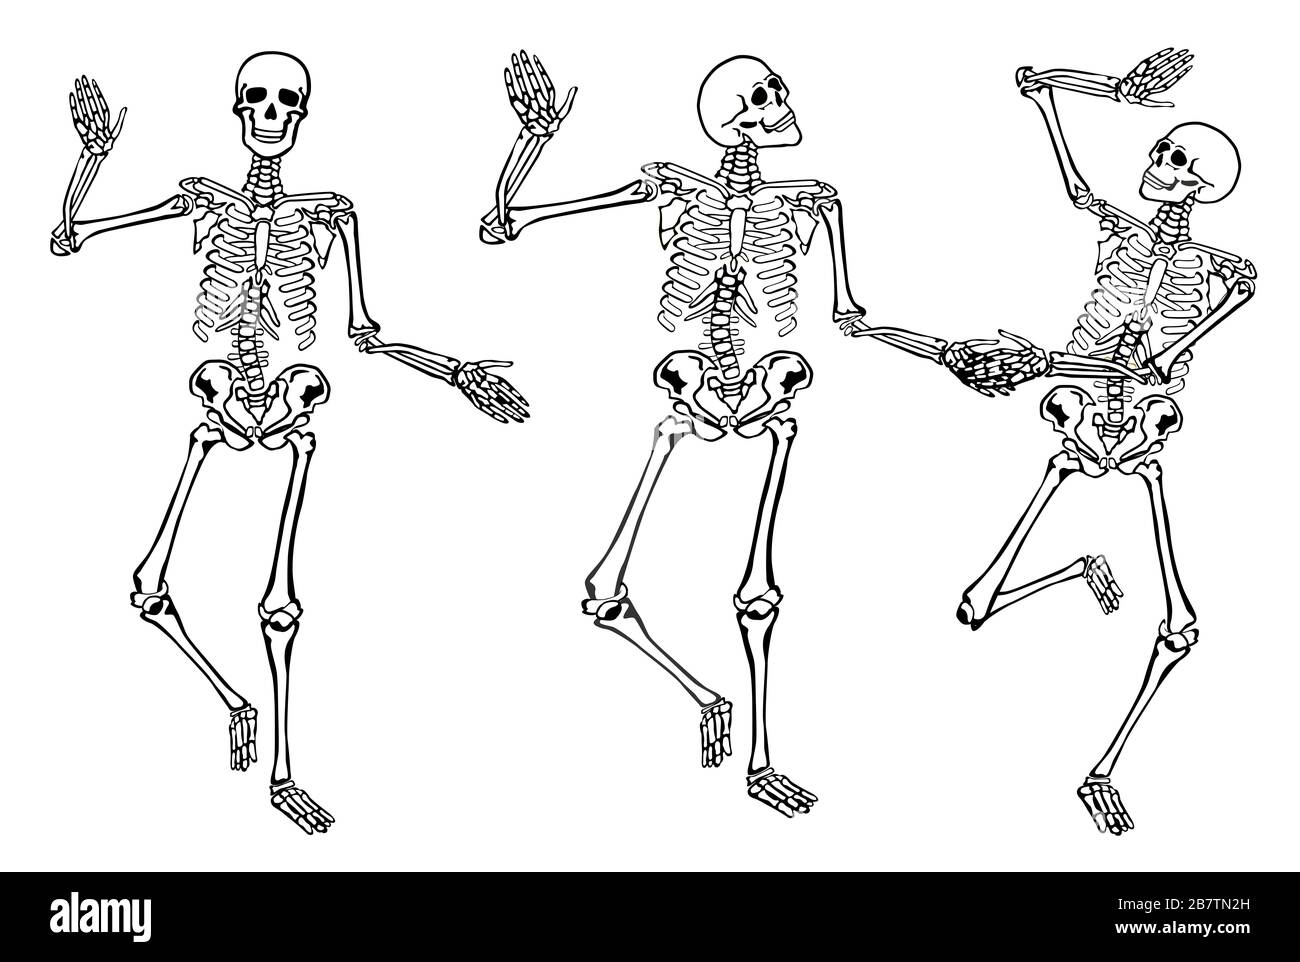 dancing skeletons isolated on white background Stock Photo